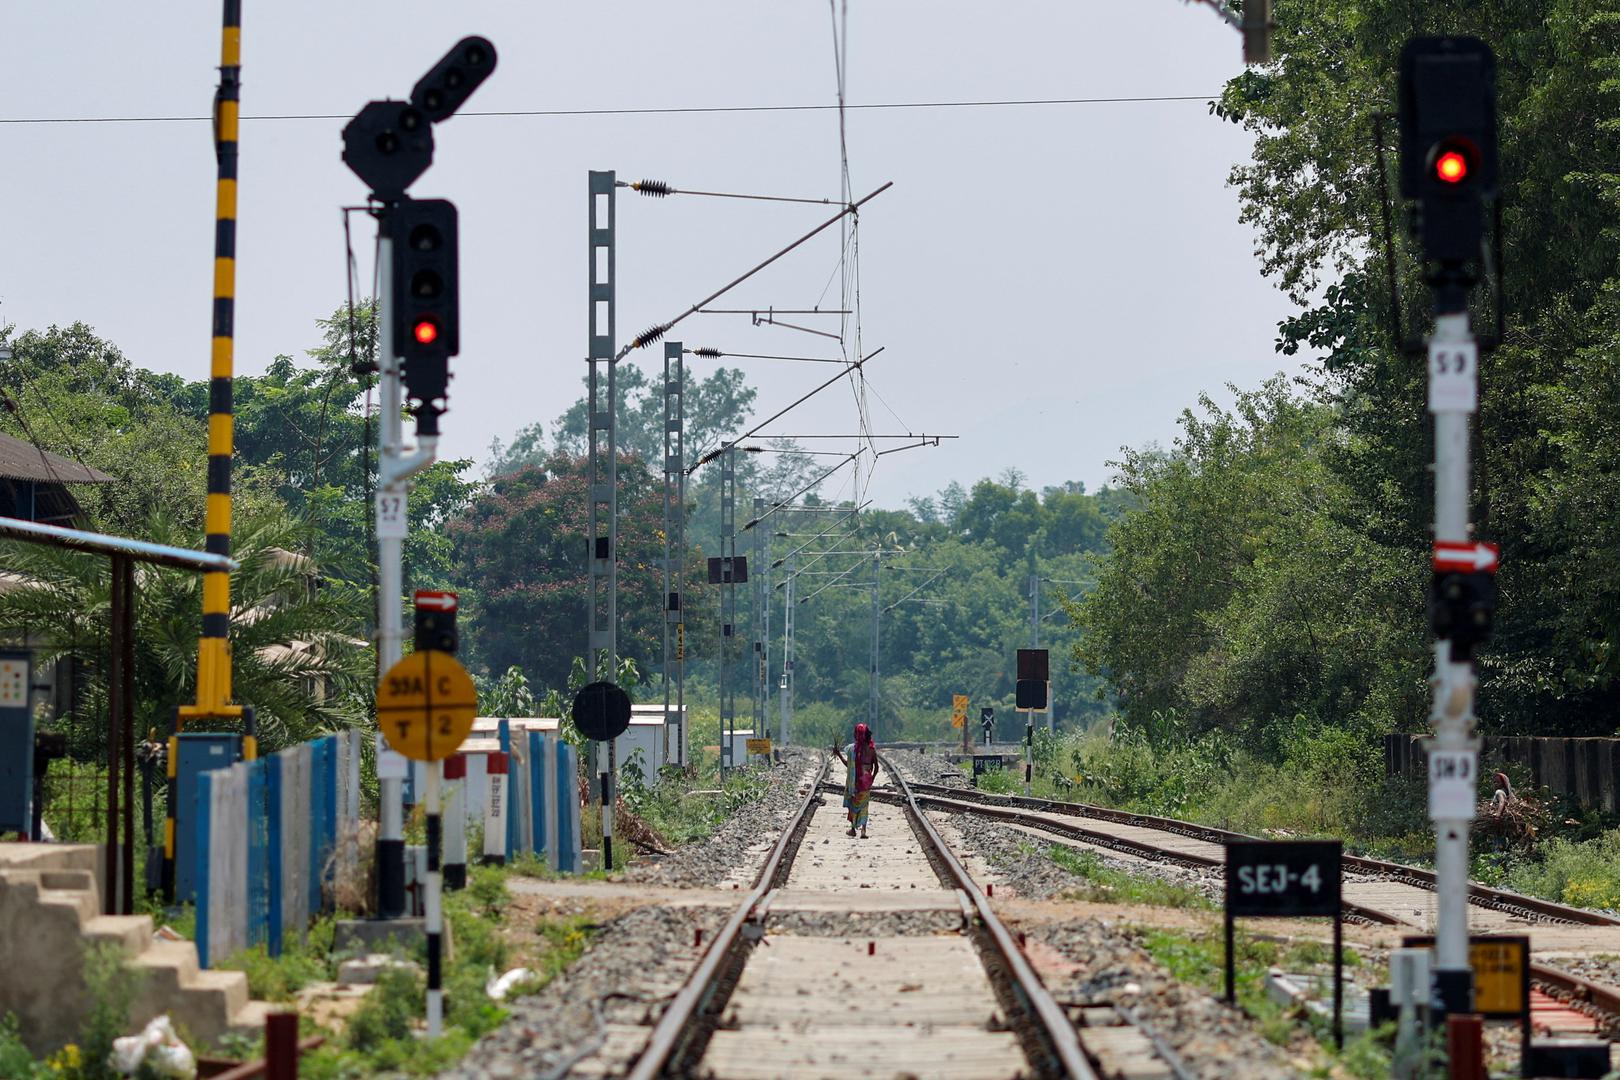 Railway signals are pictured at a crossing as a woman walks on the tracks at the site of a train collision following the accident in Balasore district in the eastern state of Odisha, India, June 4, 2023. REUTERS/Adnan Abidi Photo: ADNAN ABIDI/REUTERS